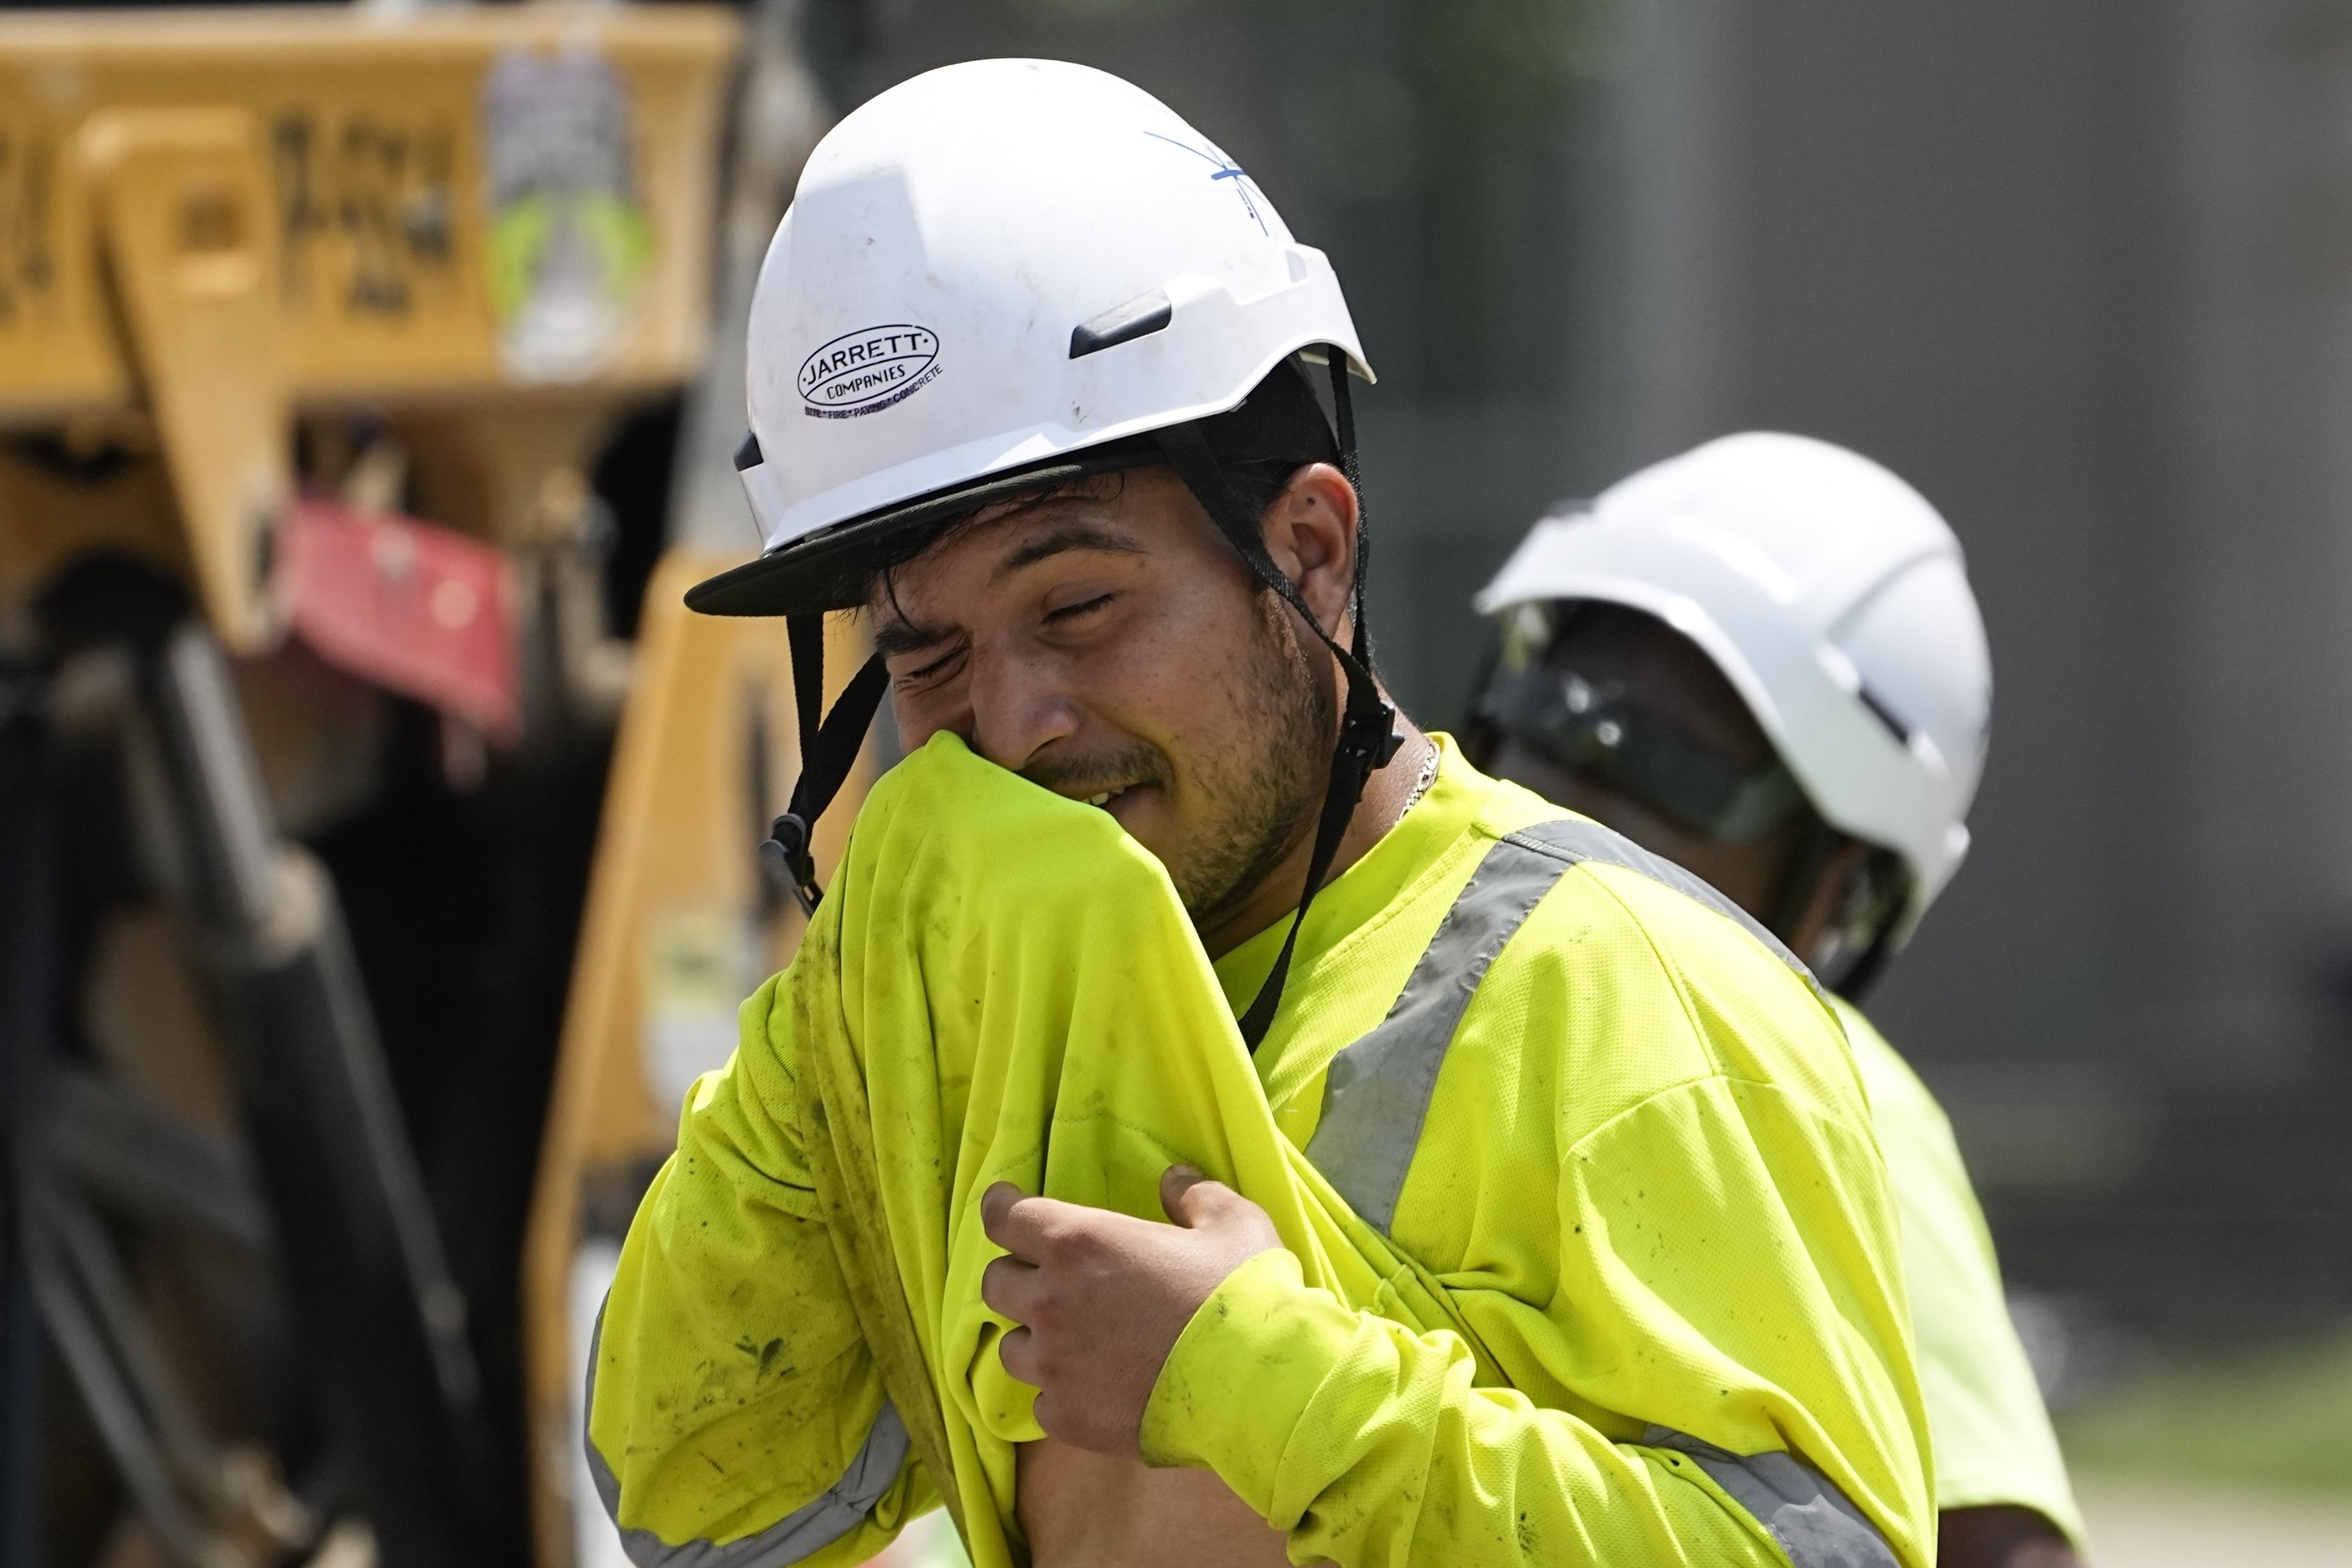 A worker in safety gear and a white helmet wipes his face in the heat.